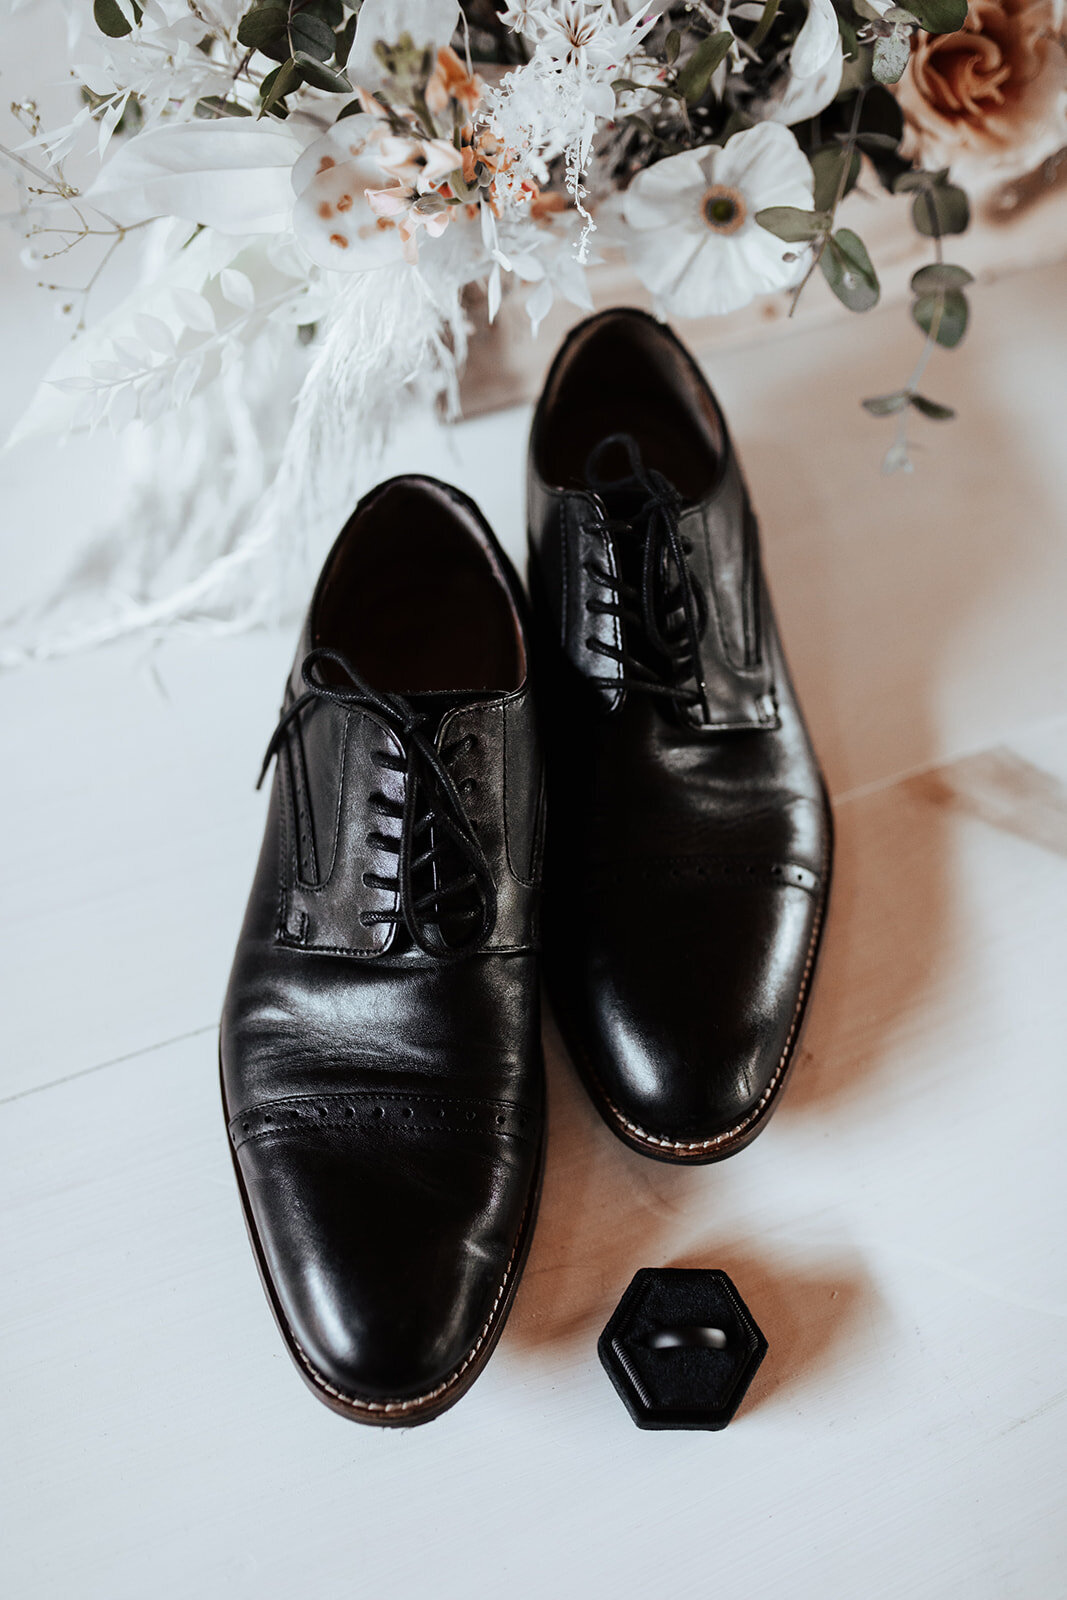 Shoes and cufflings